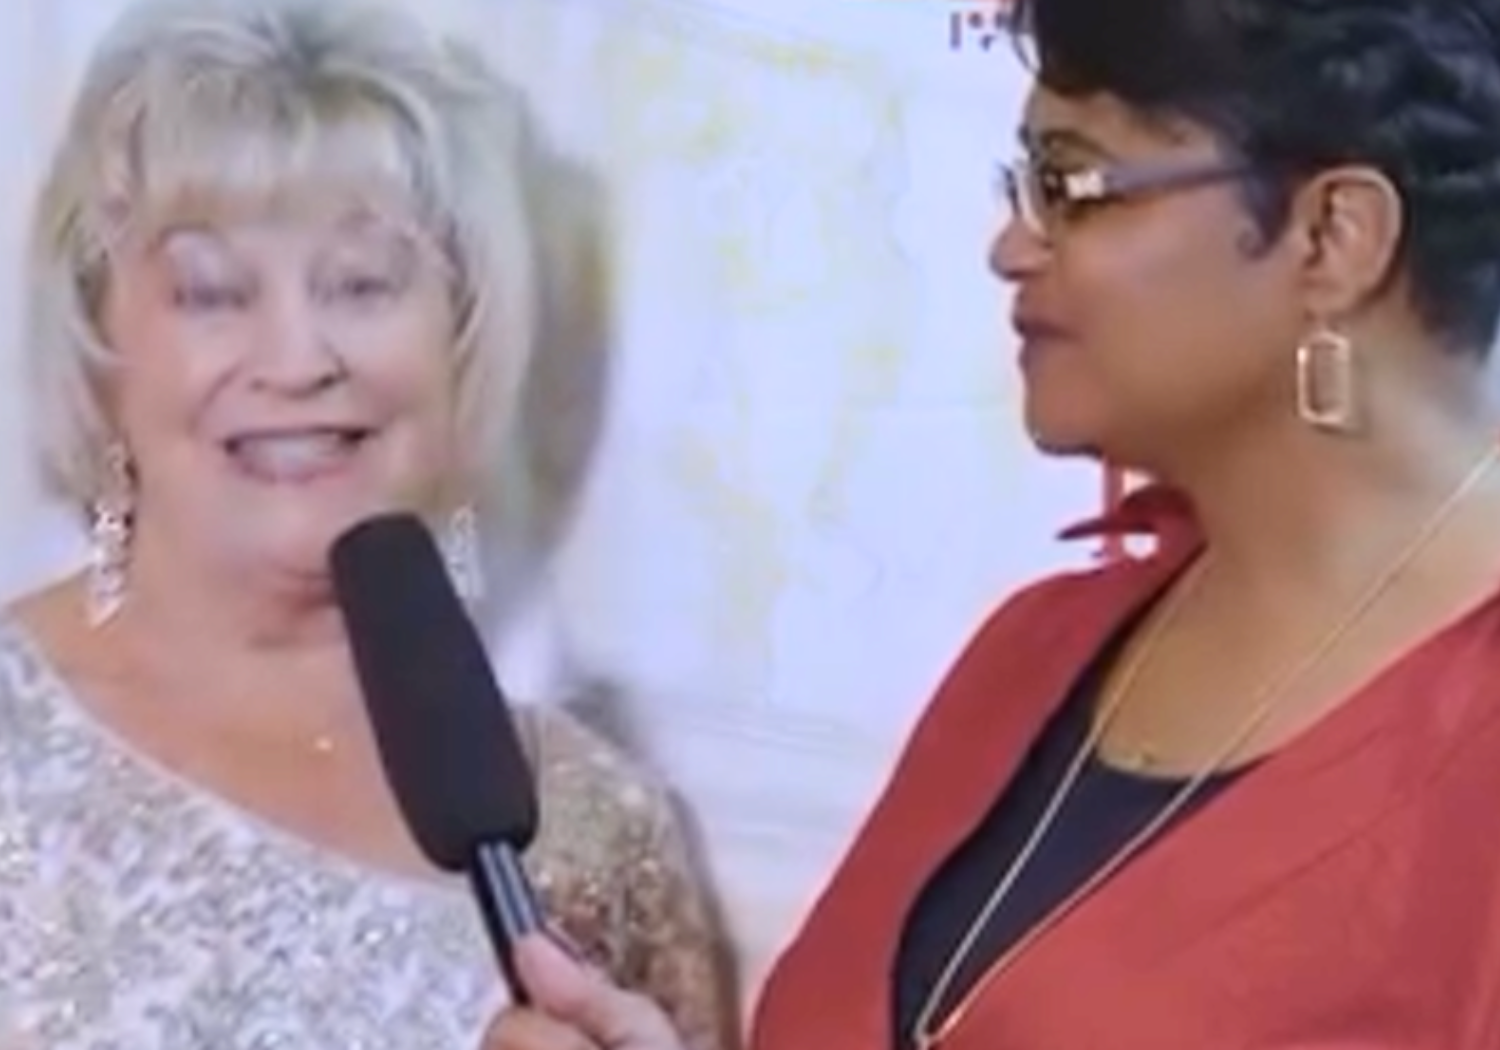 Carla Jackson Interviewing Jane "Goldie" Winn at the Red Letter Awards